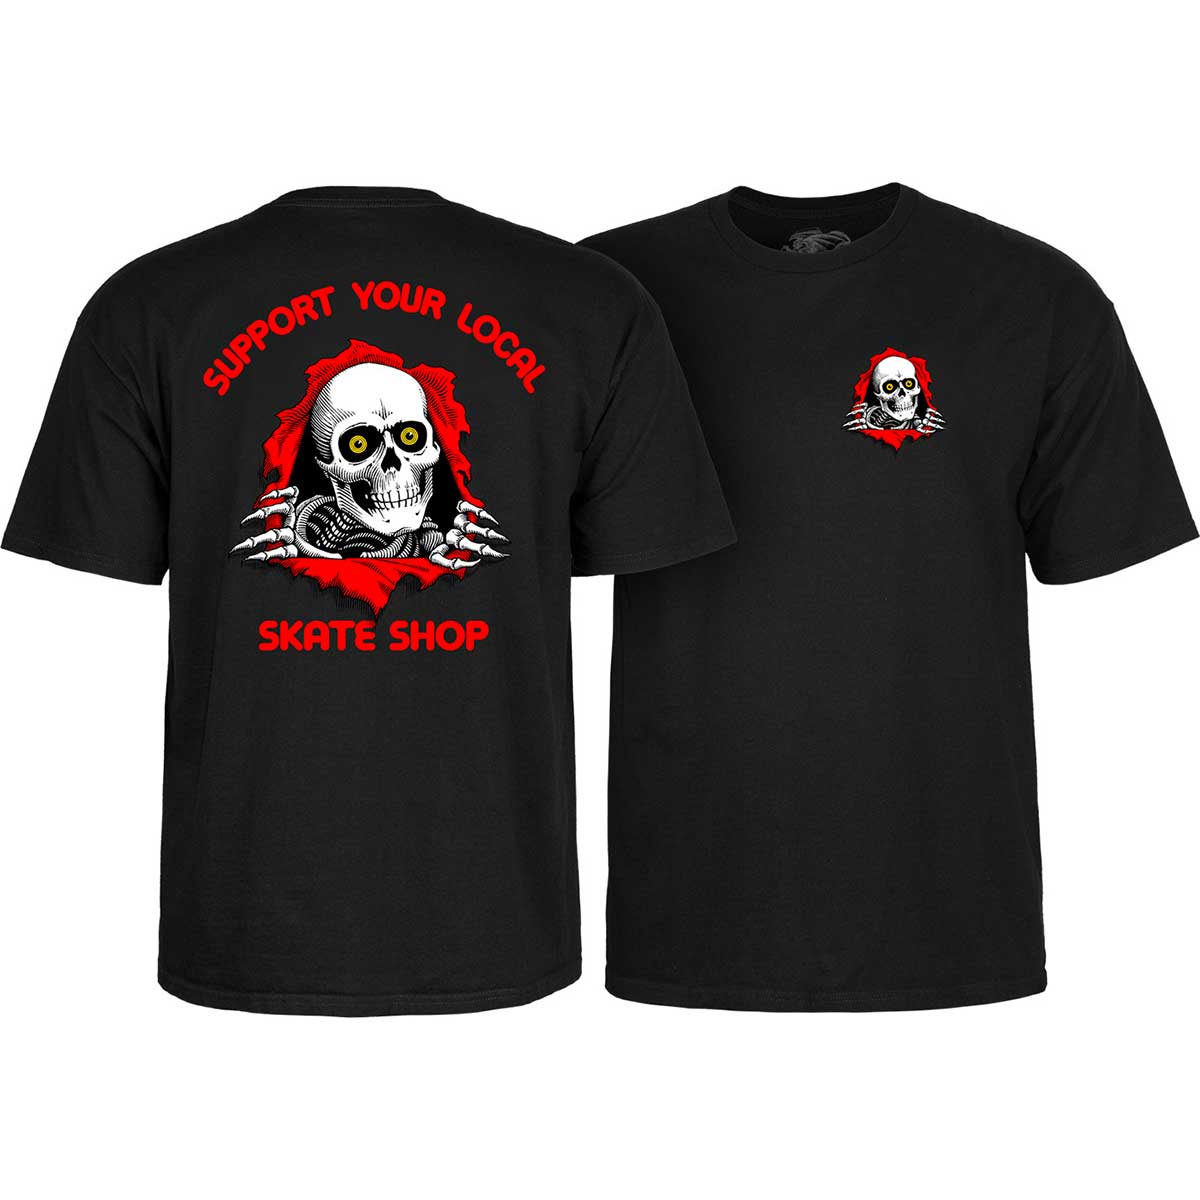 POWELL PERALTA SUPPORT YOUR LOCAL SKATE SHOP T-SHIRT BLACK - The Drive Skateshop